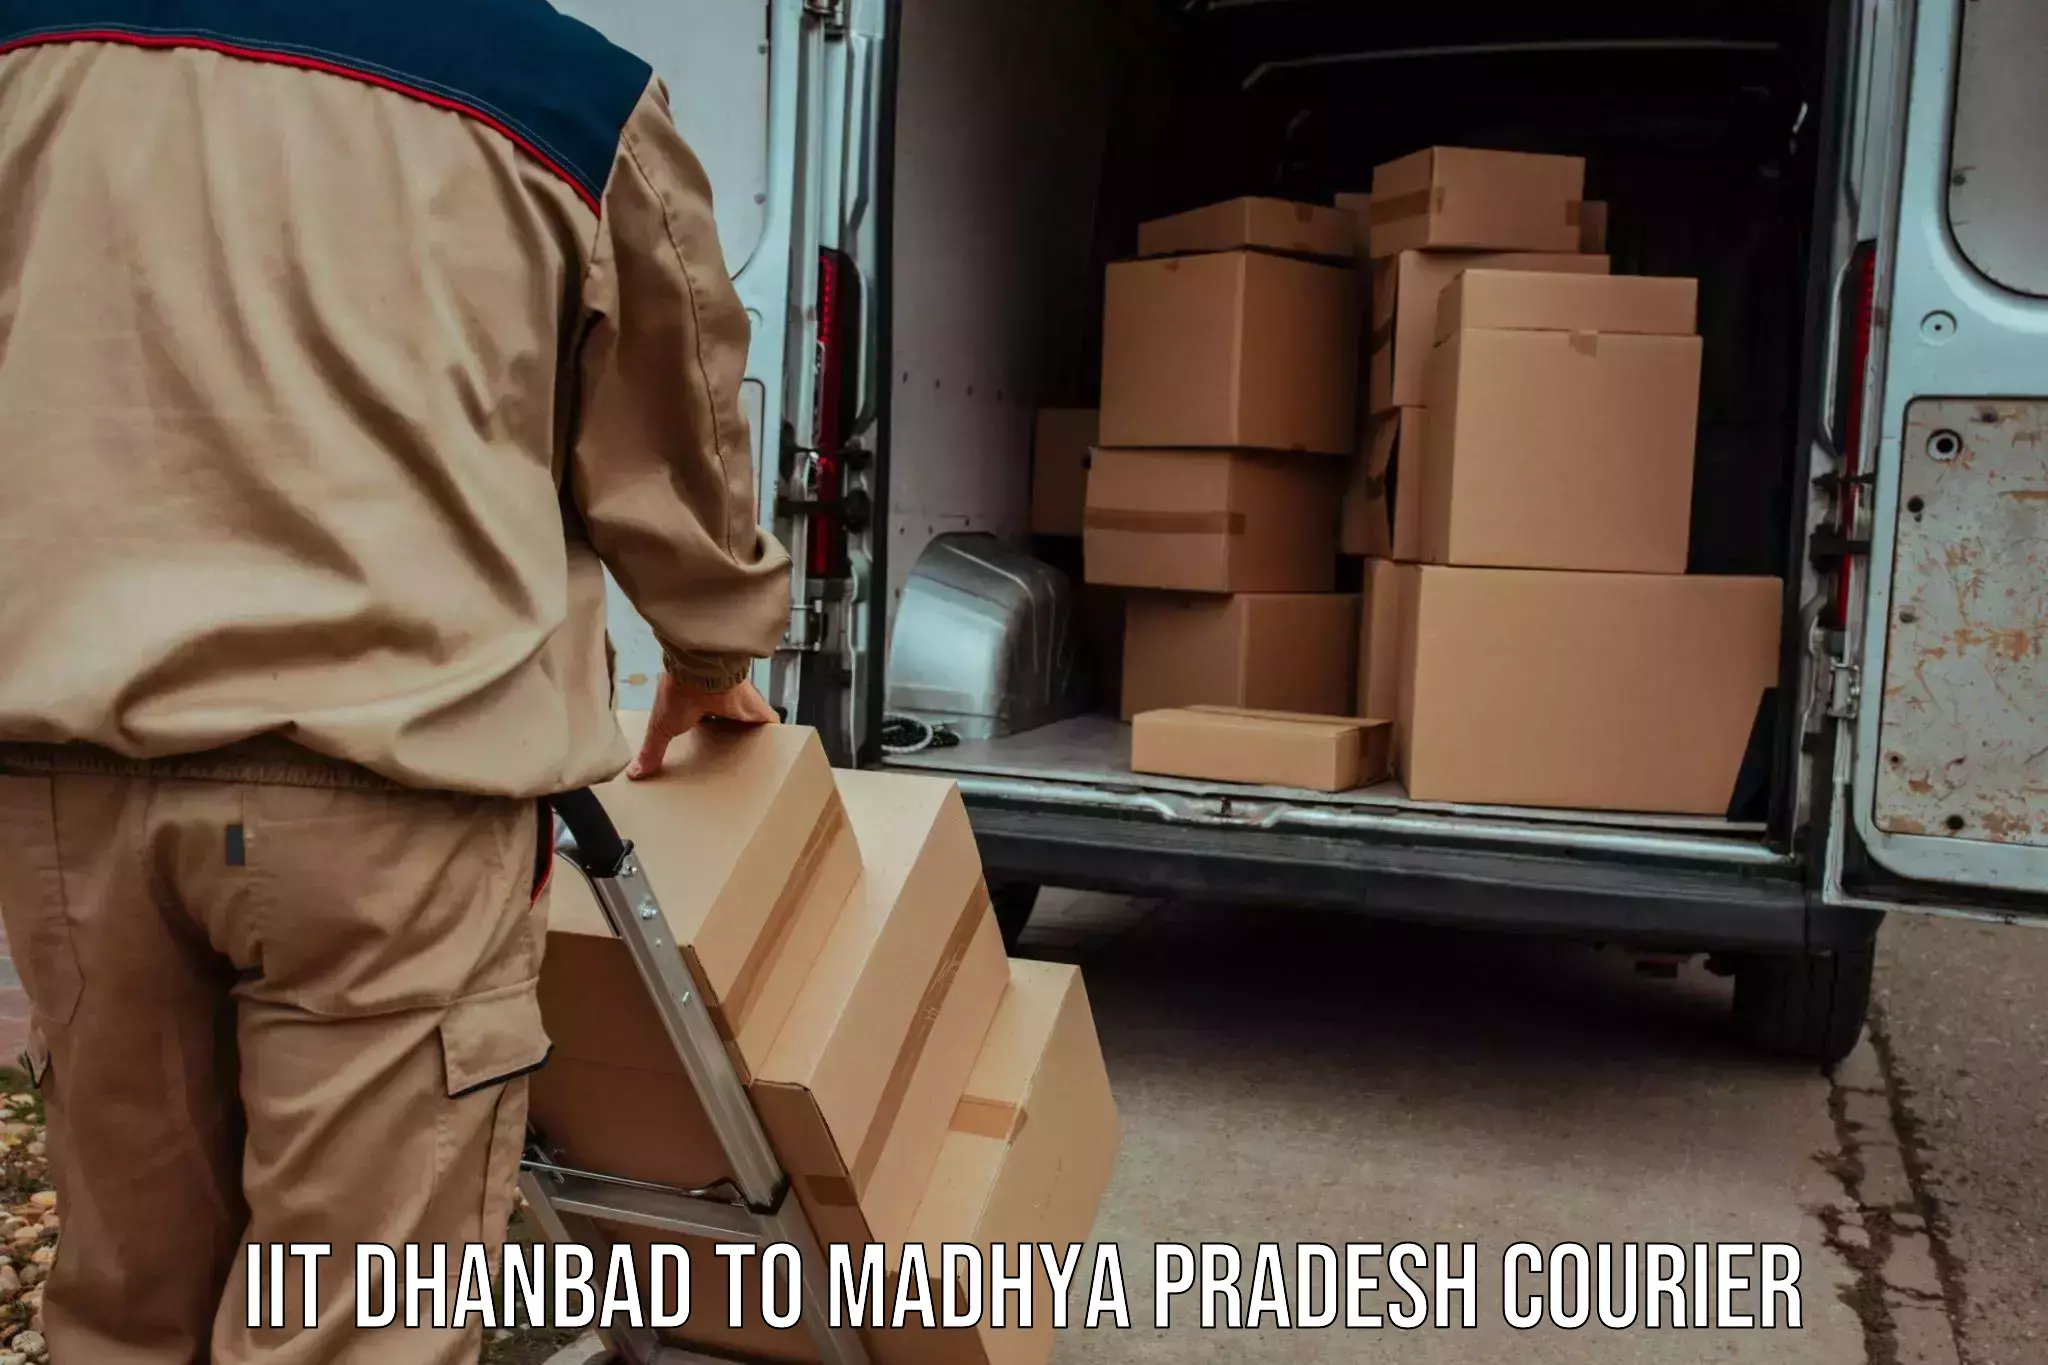 Express delivery capabilities IIT Dhanbad to Churhat